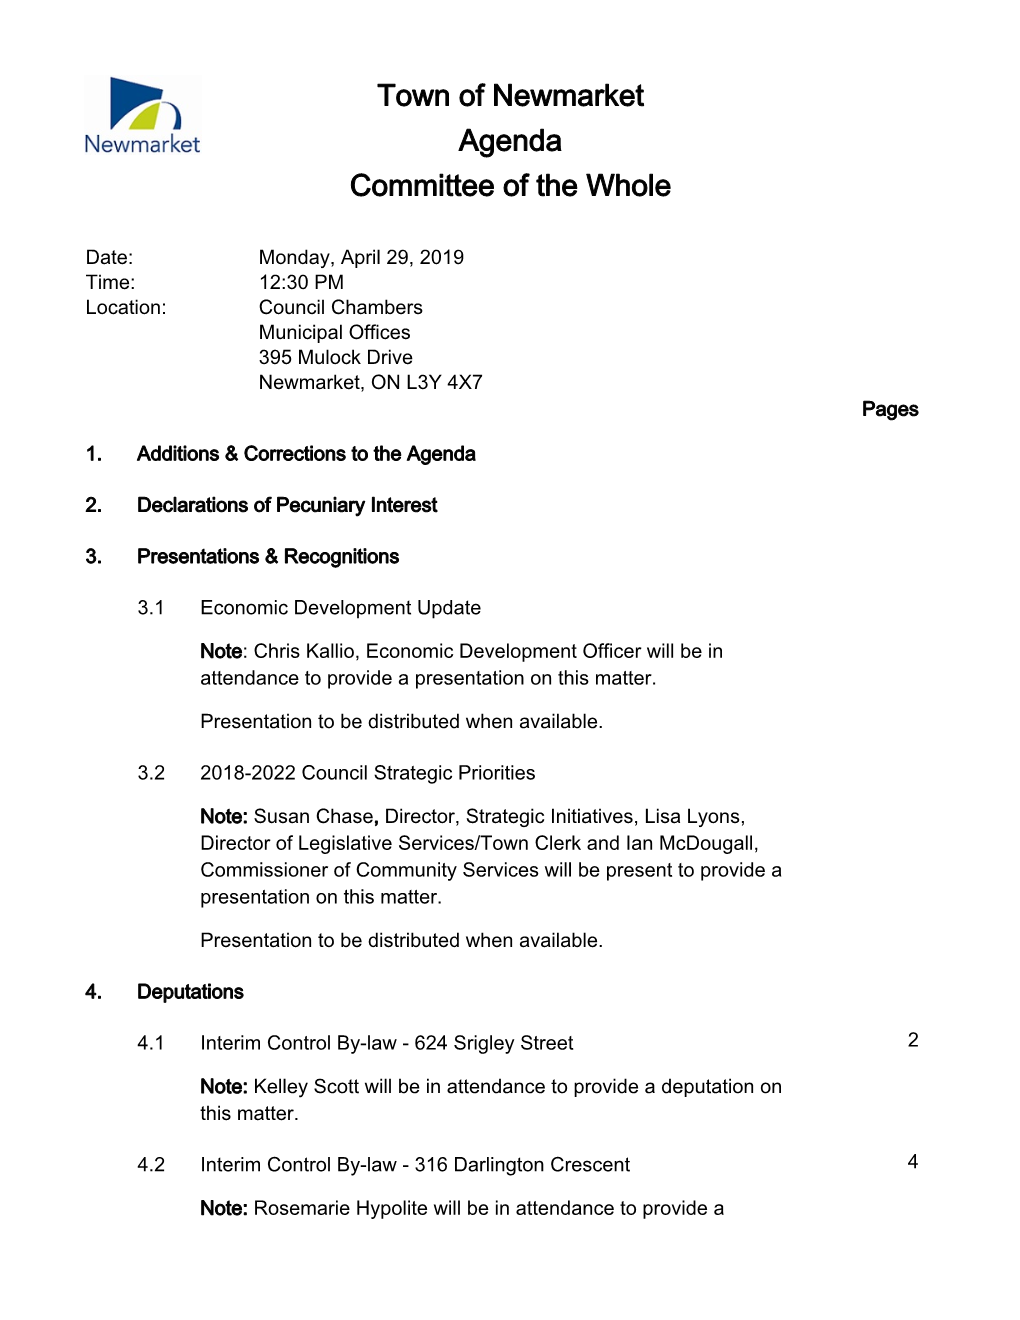 Town of Newmarket Agenda Committee of the Whole